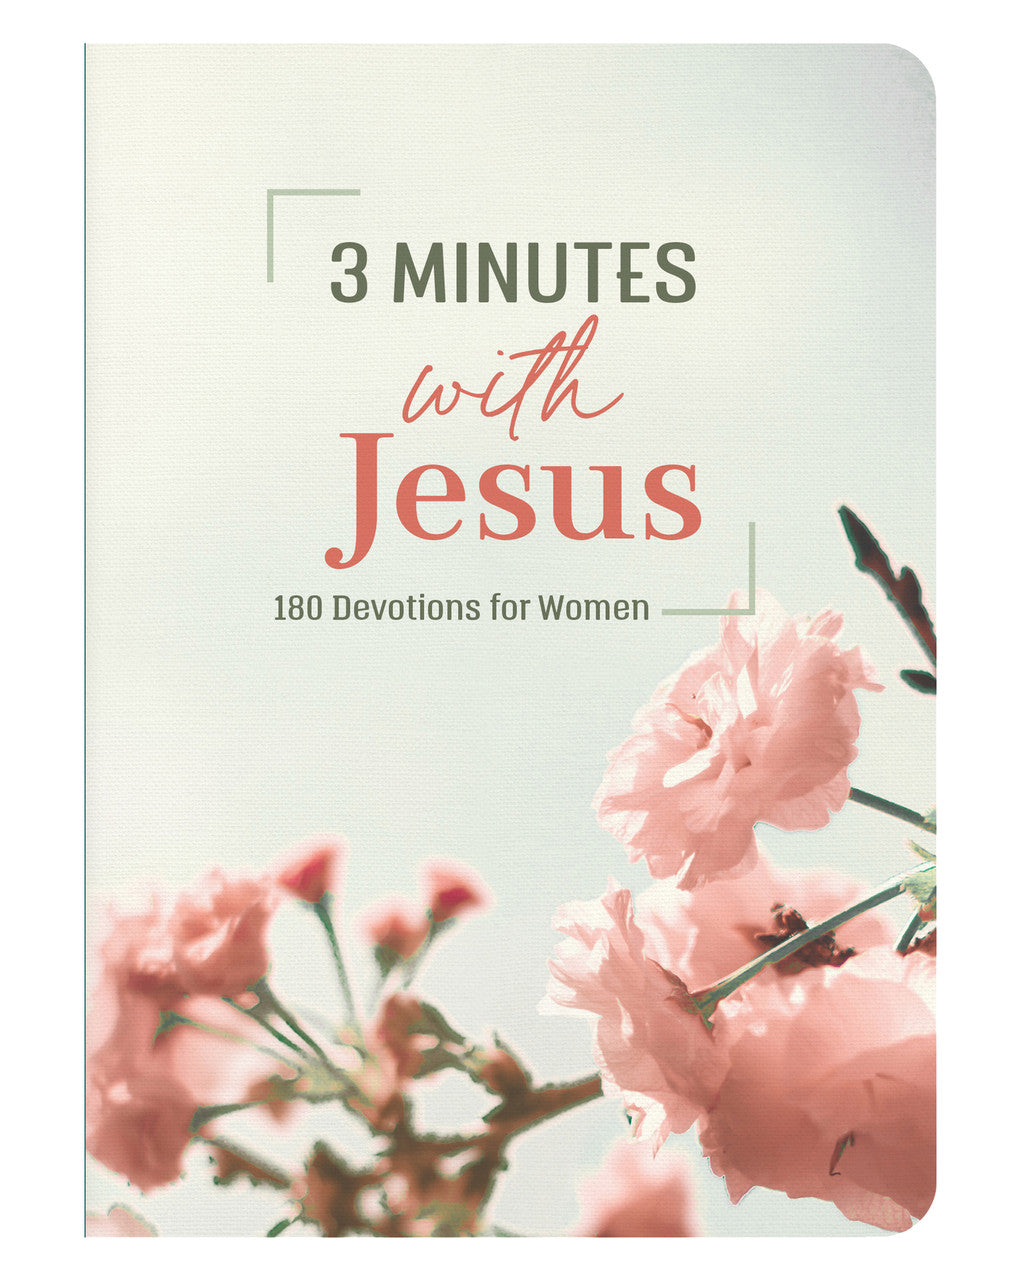 3 Minutes with Jesus: 180 Devotions for Women - The Christian Gift Company